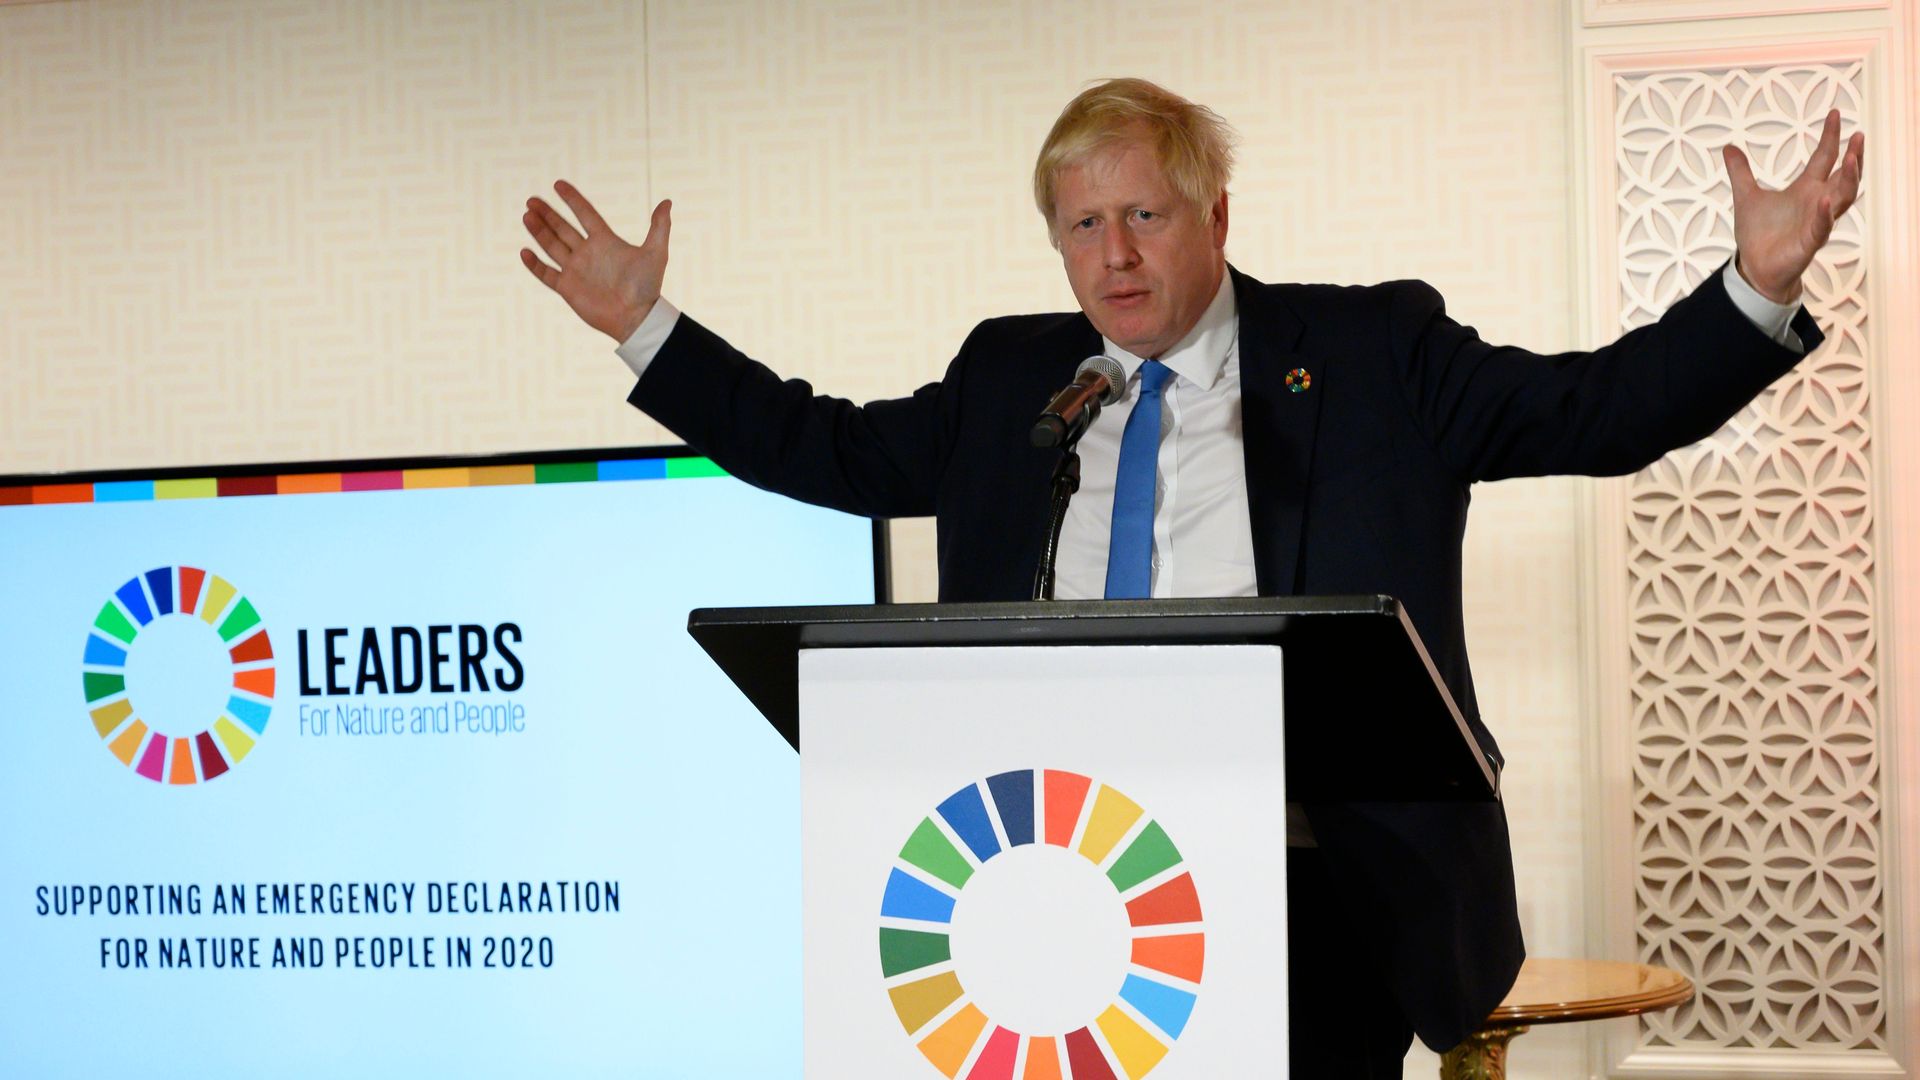 British Prime Minister Boris Johnson speaks at the Leaders for Nature and People event during the Climate Action Summit 2019 in the United Nations General Assembly Hall September 23